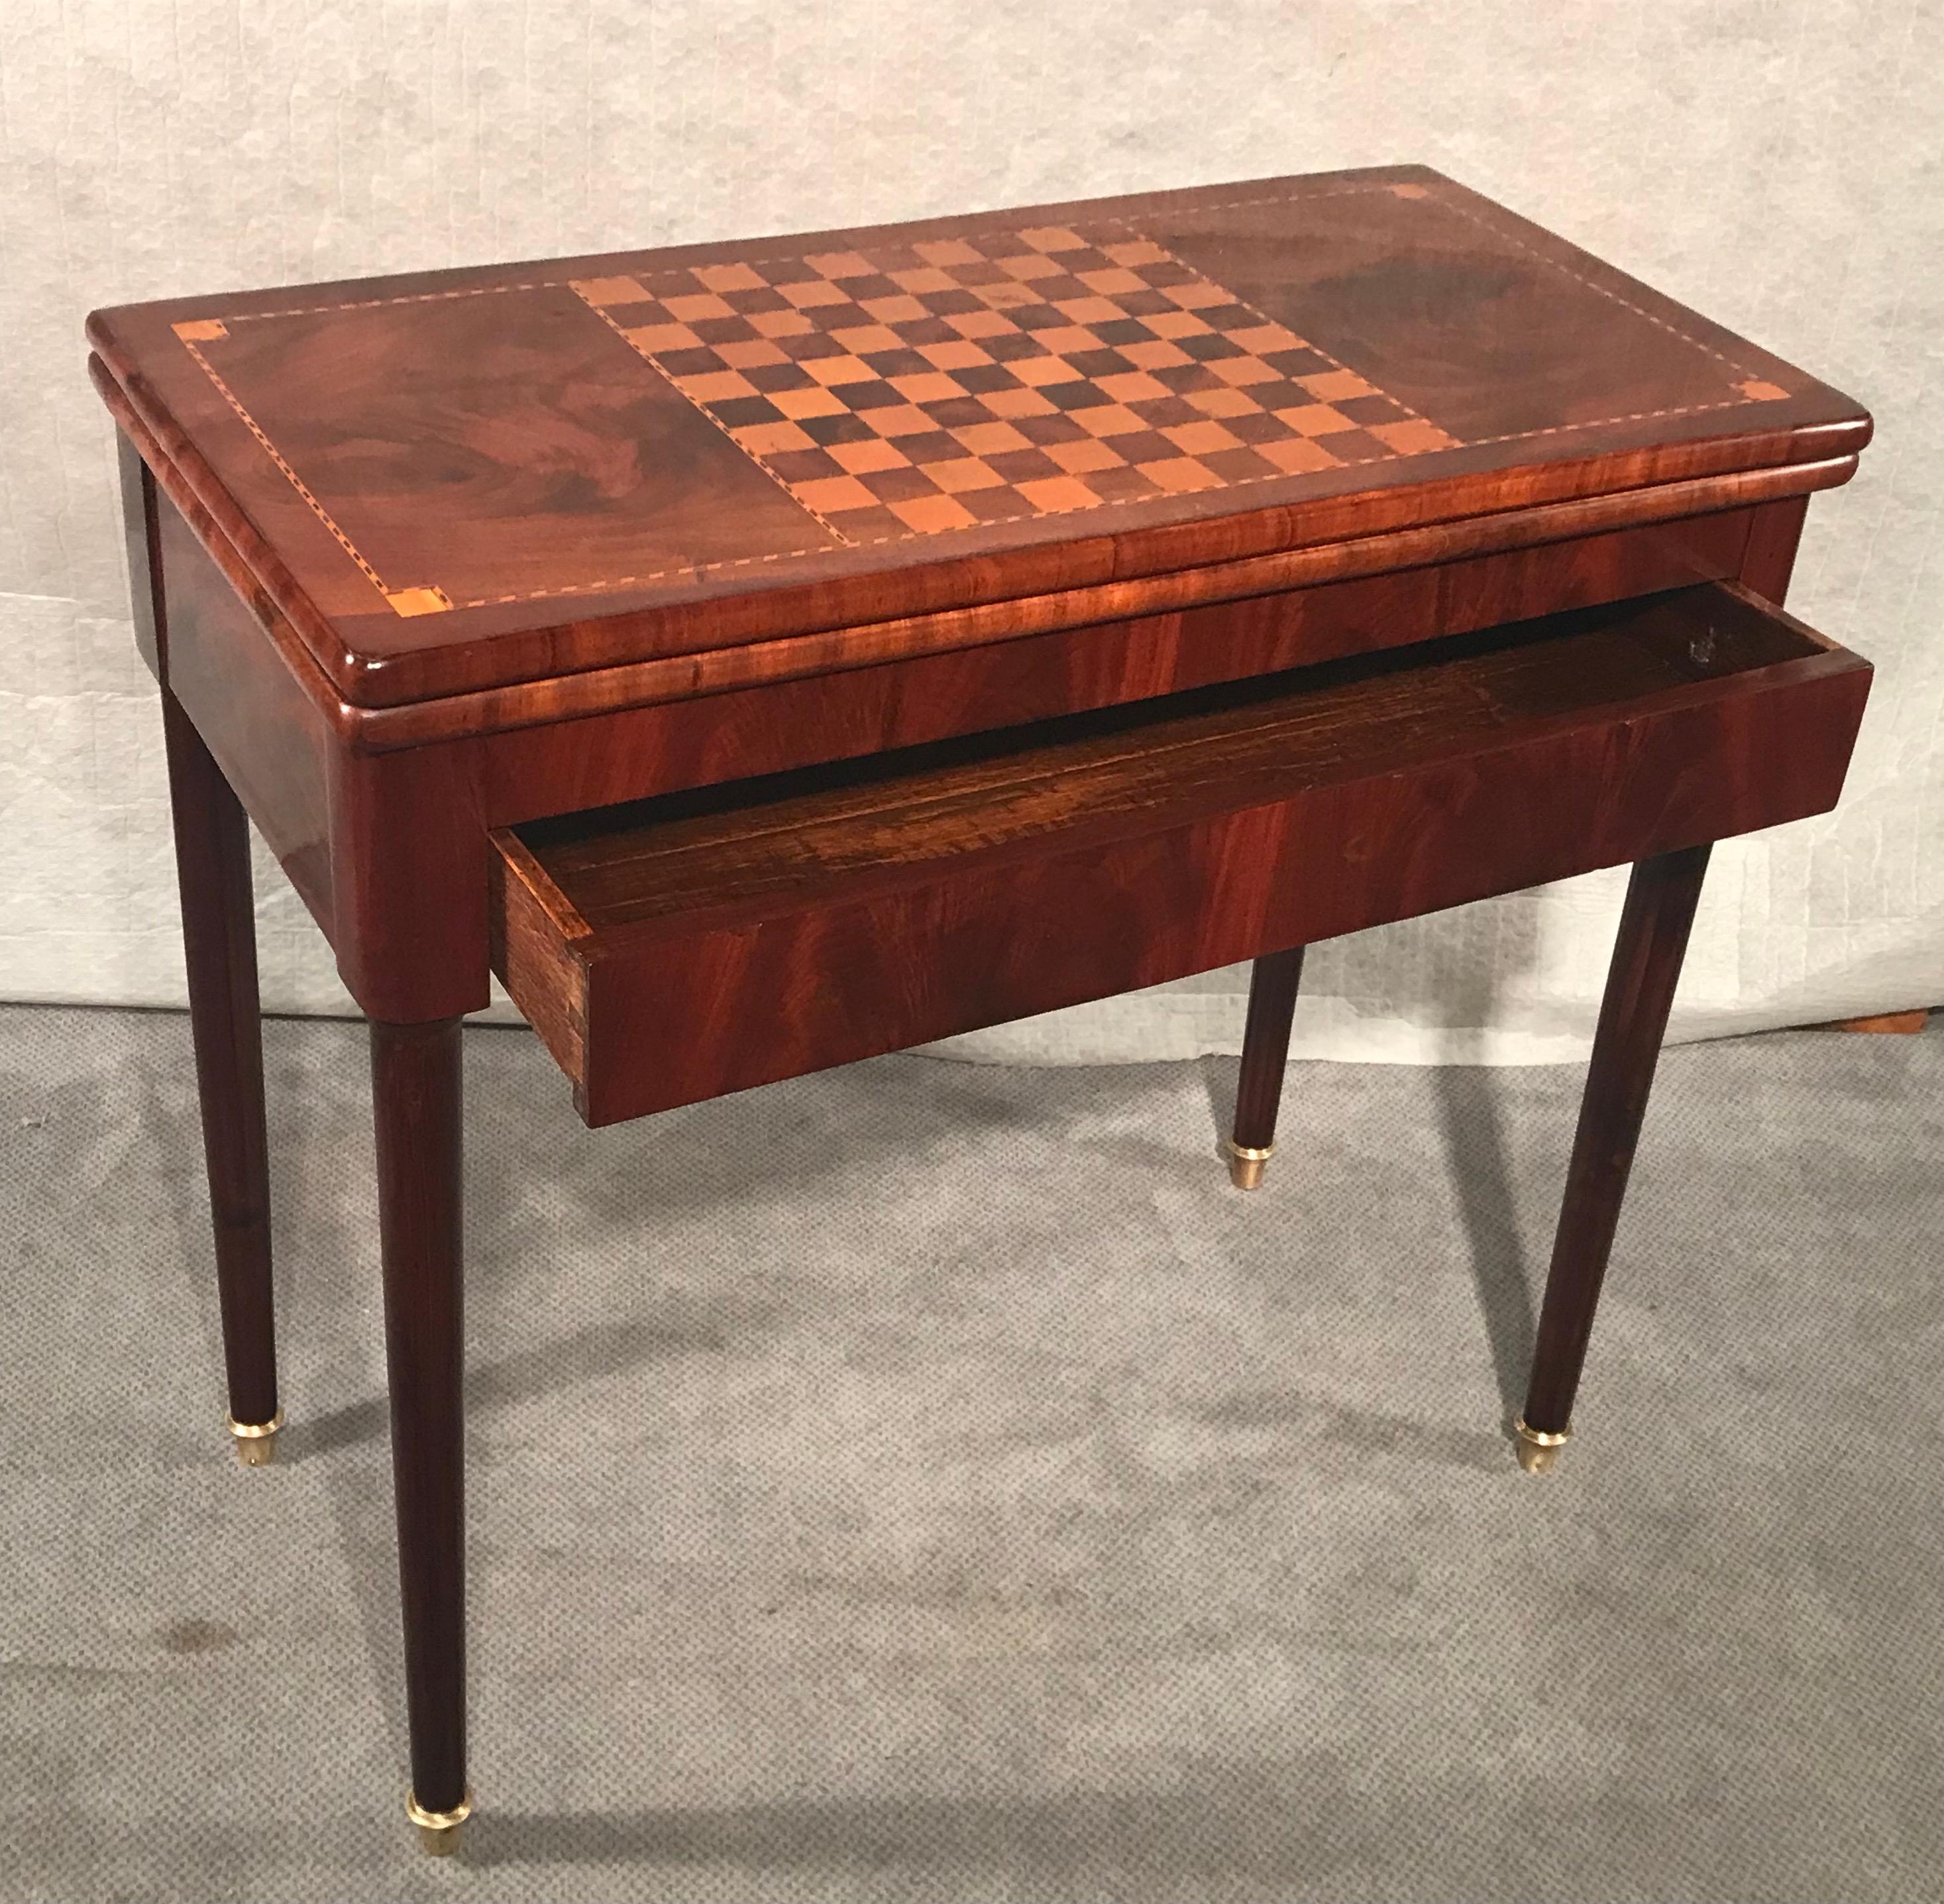 This neoclassical game table from France dates back to 1810-20. It has a chess board on the top which is framed by an elegant inlaid ribbon. The inside of the table is decorated with a green felt. The unfolded top can be turned and rests then on the